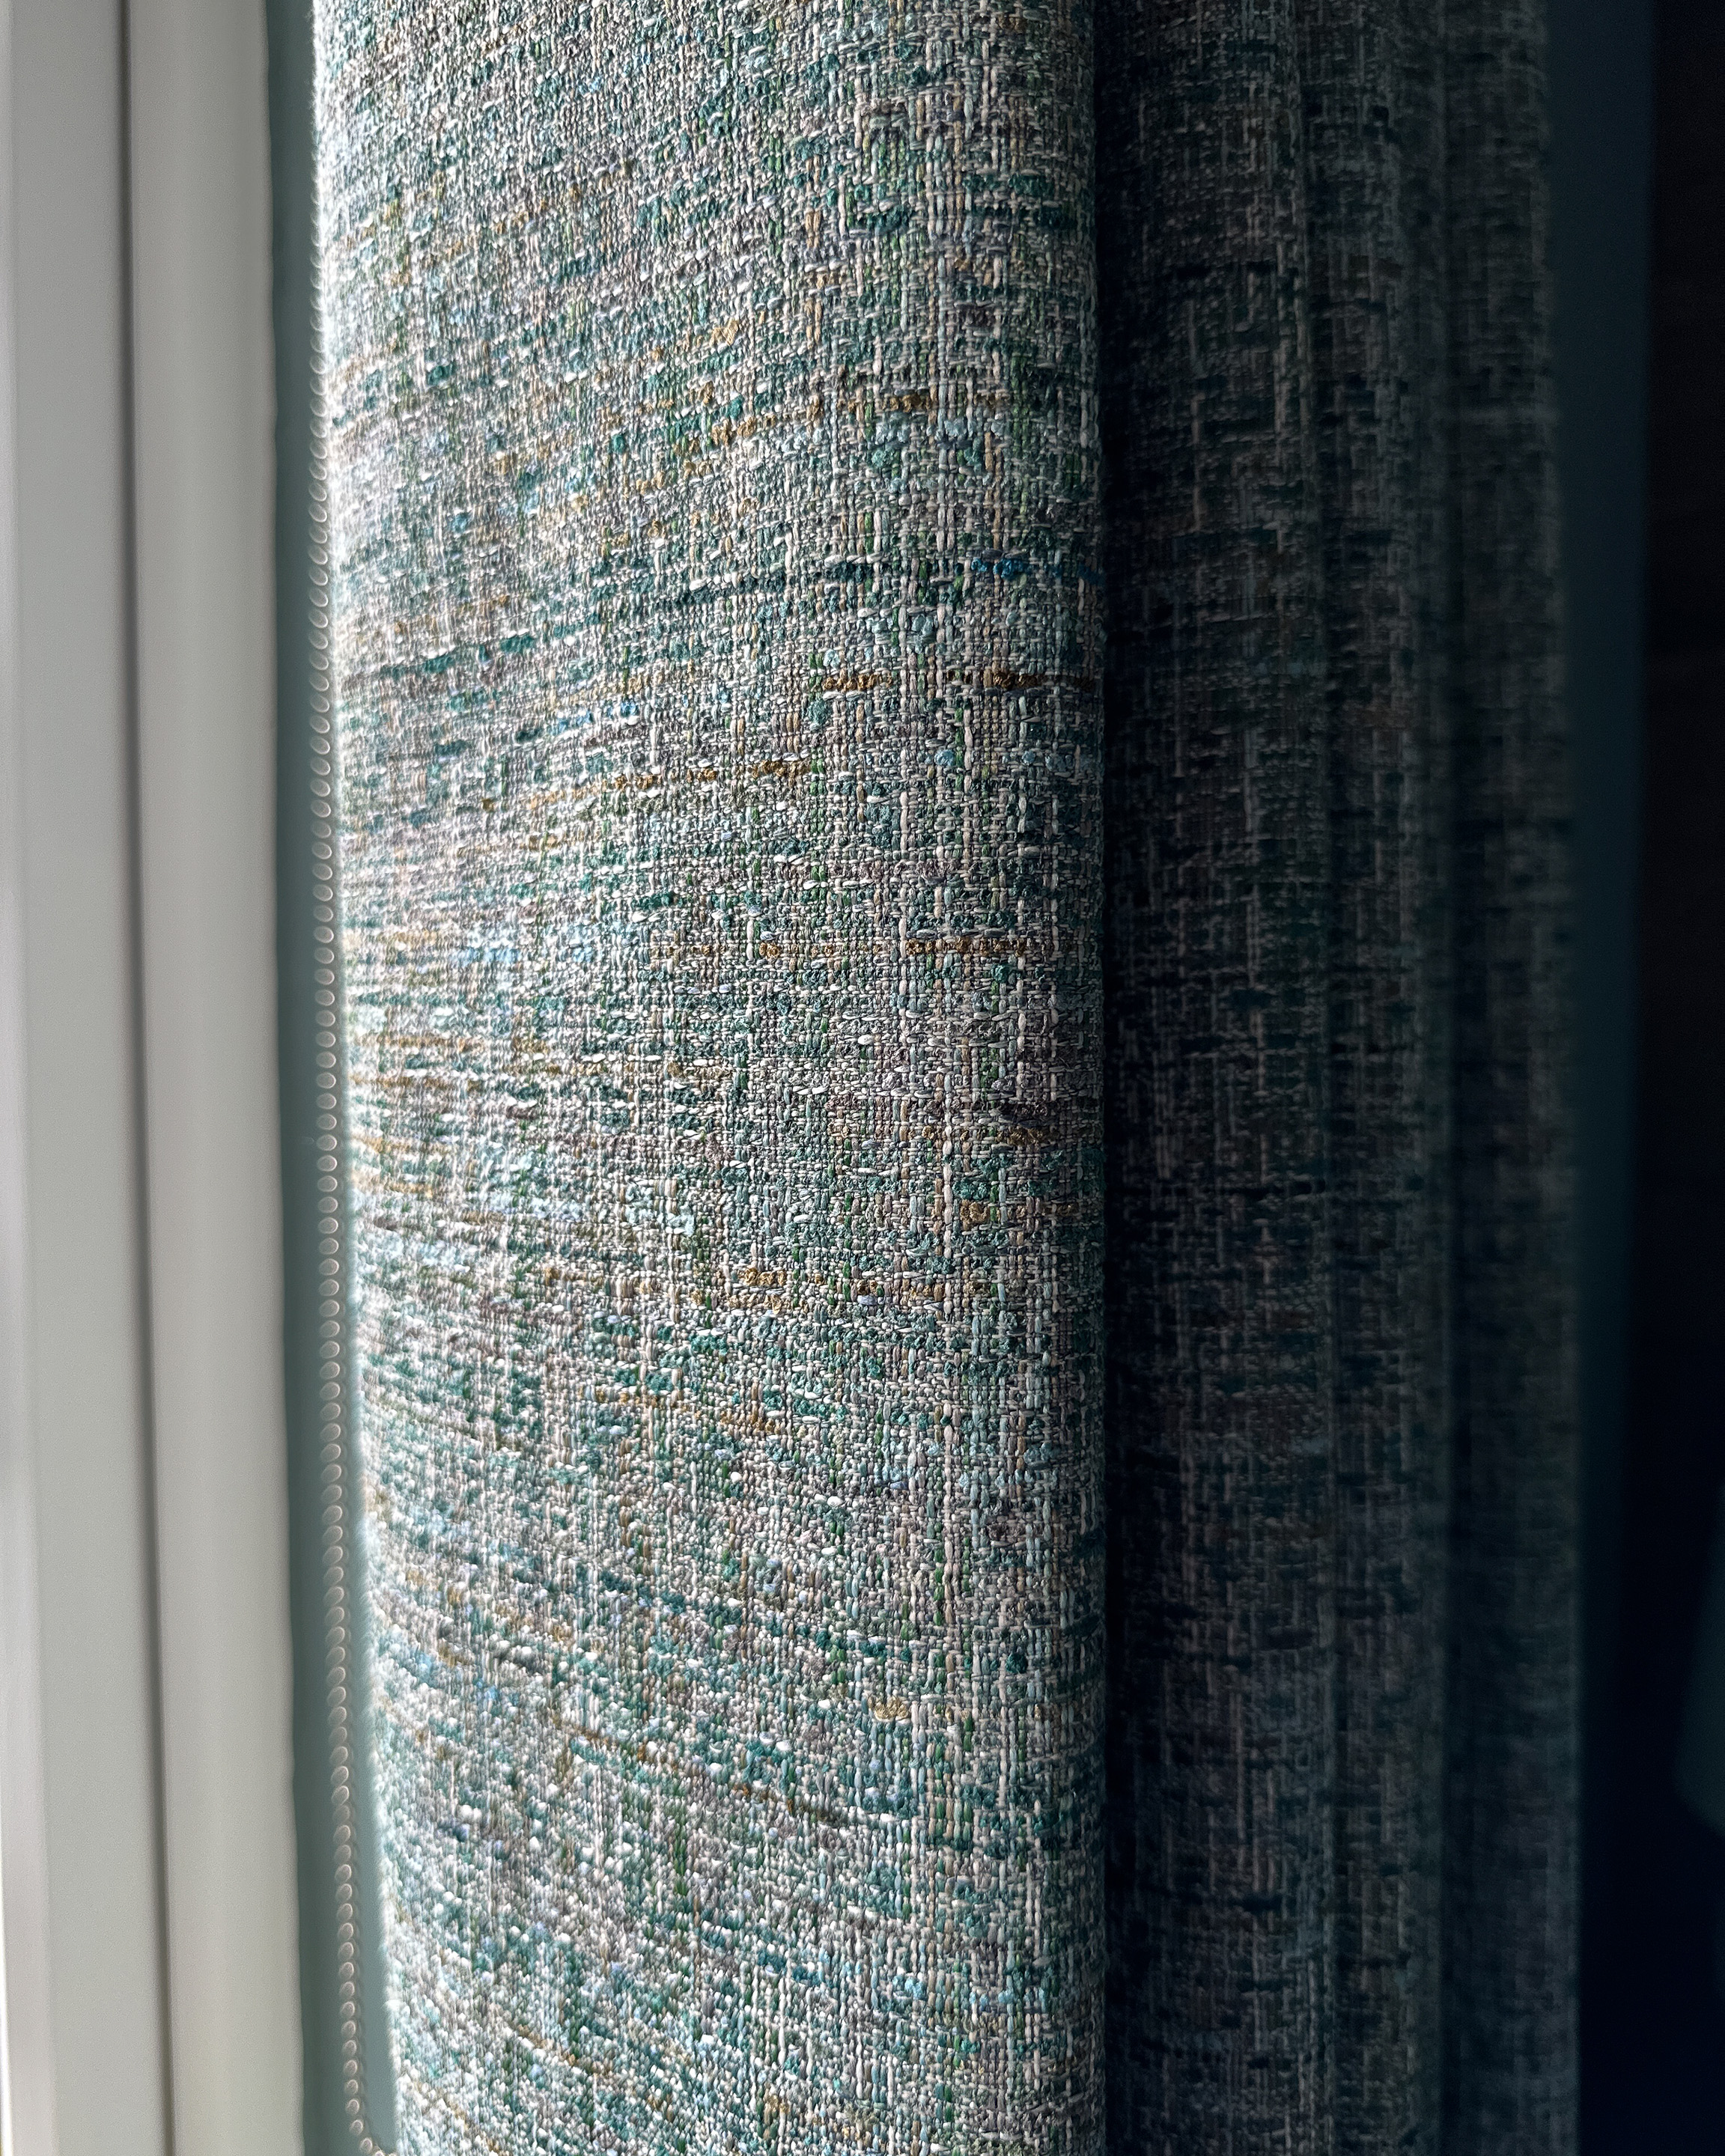 Close up of textured curtain fabric, which is Studio G Cetara in Kingsfisher.